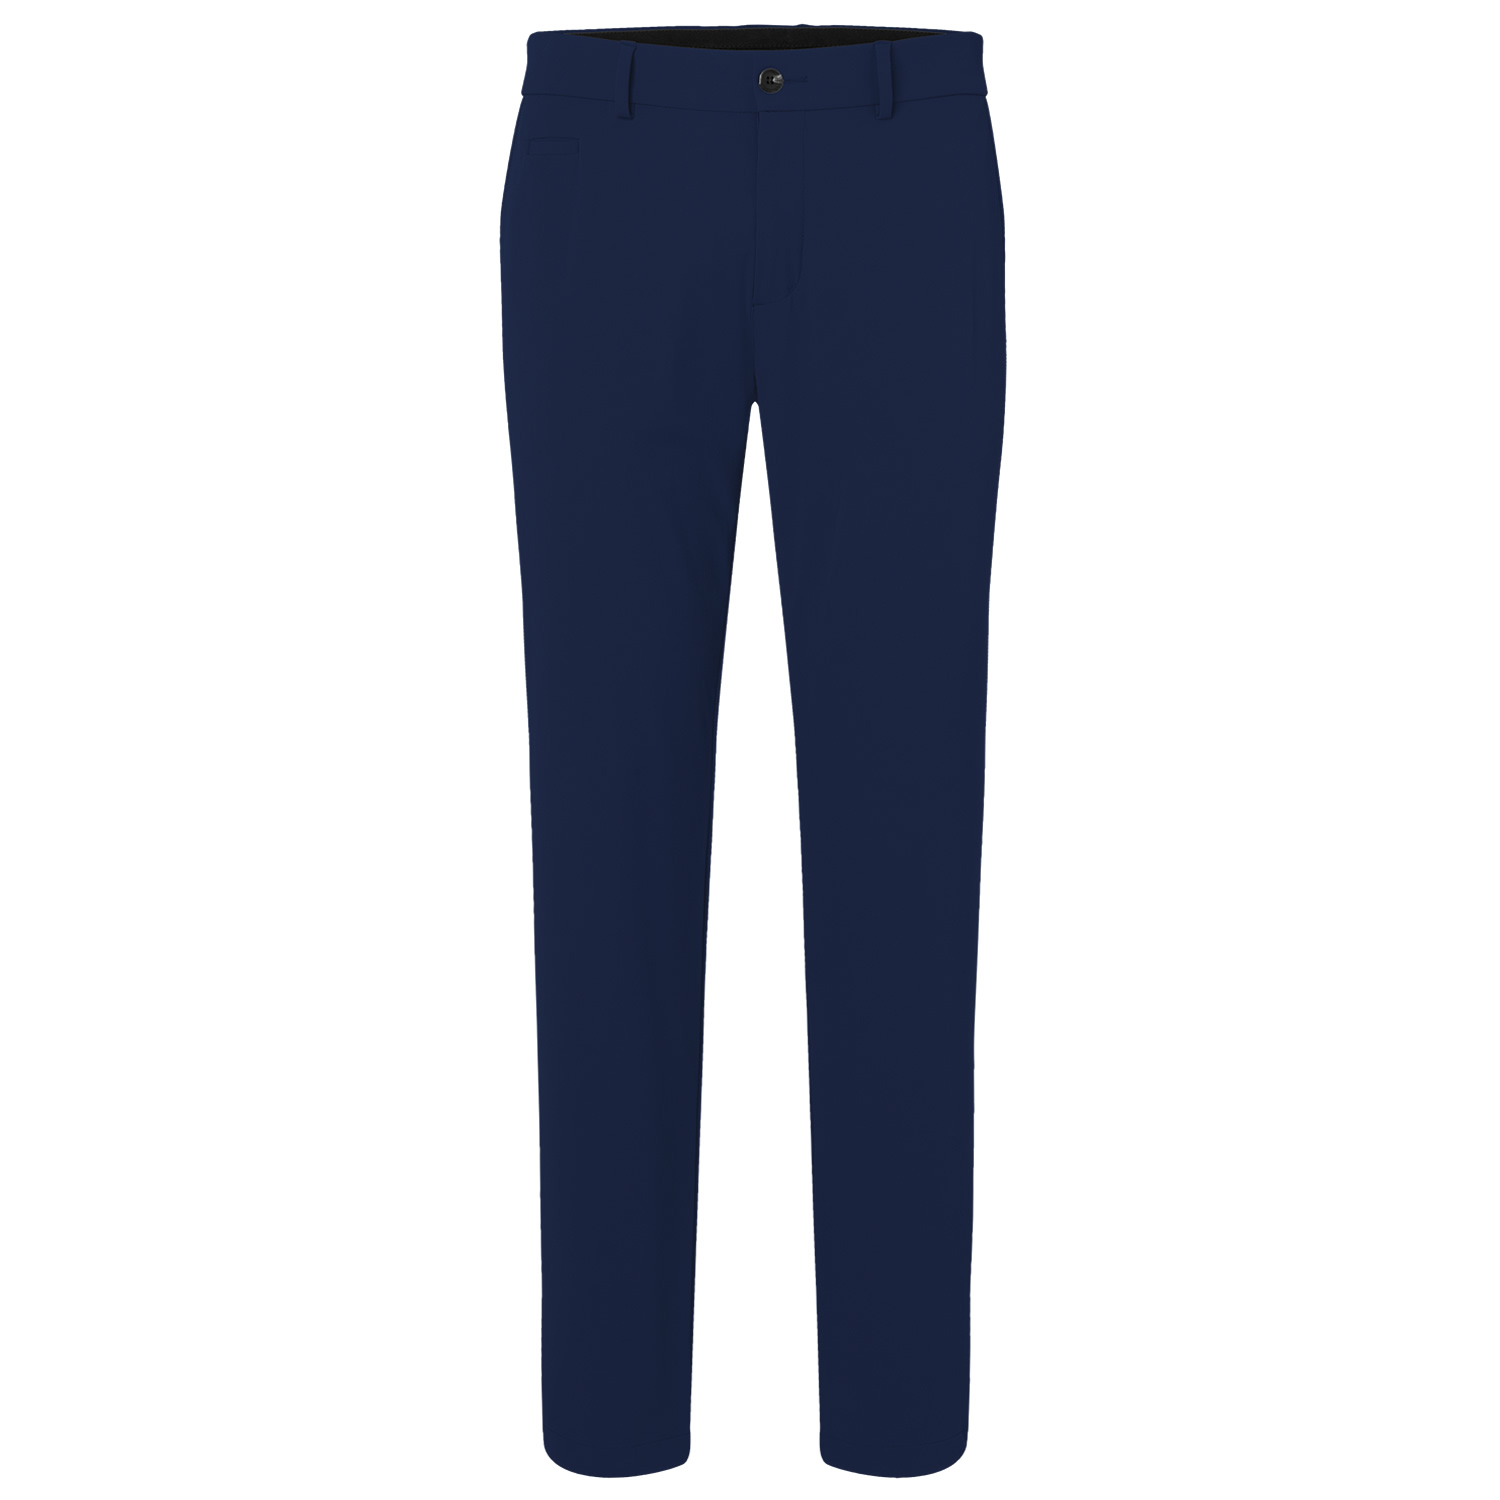 KJUS Ike Tailored Fit Golf Trousers